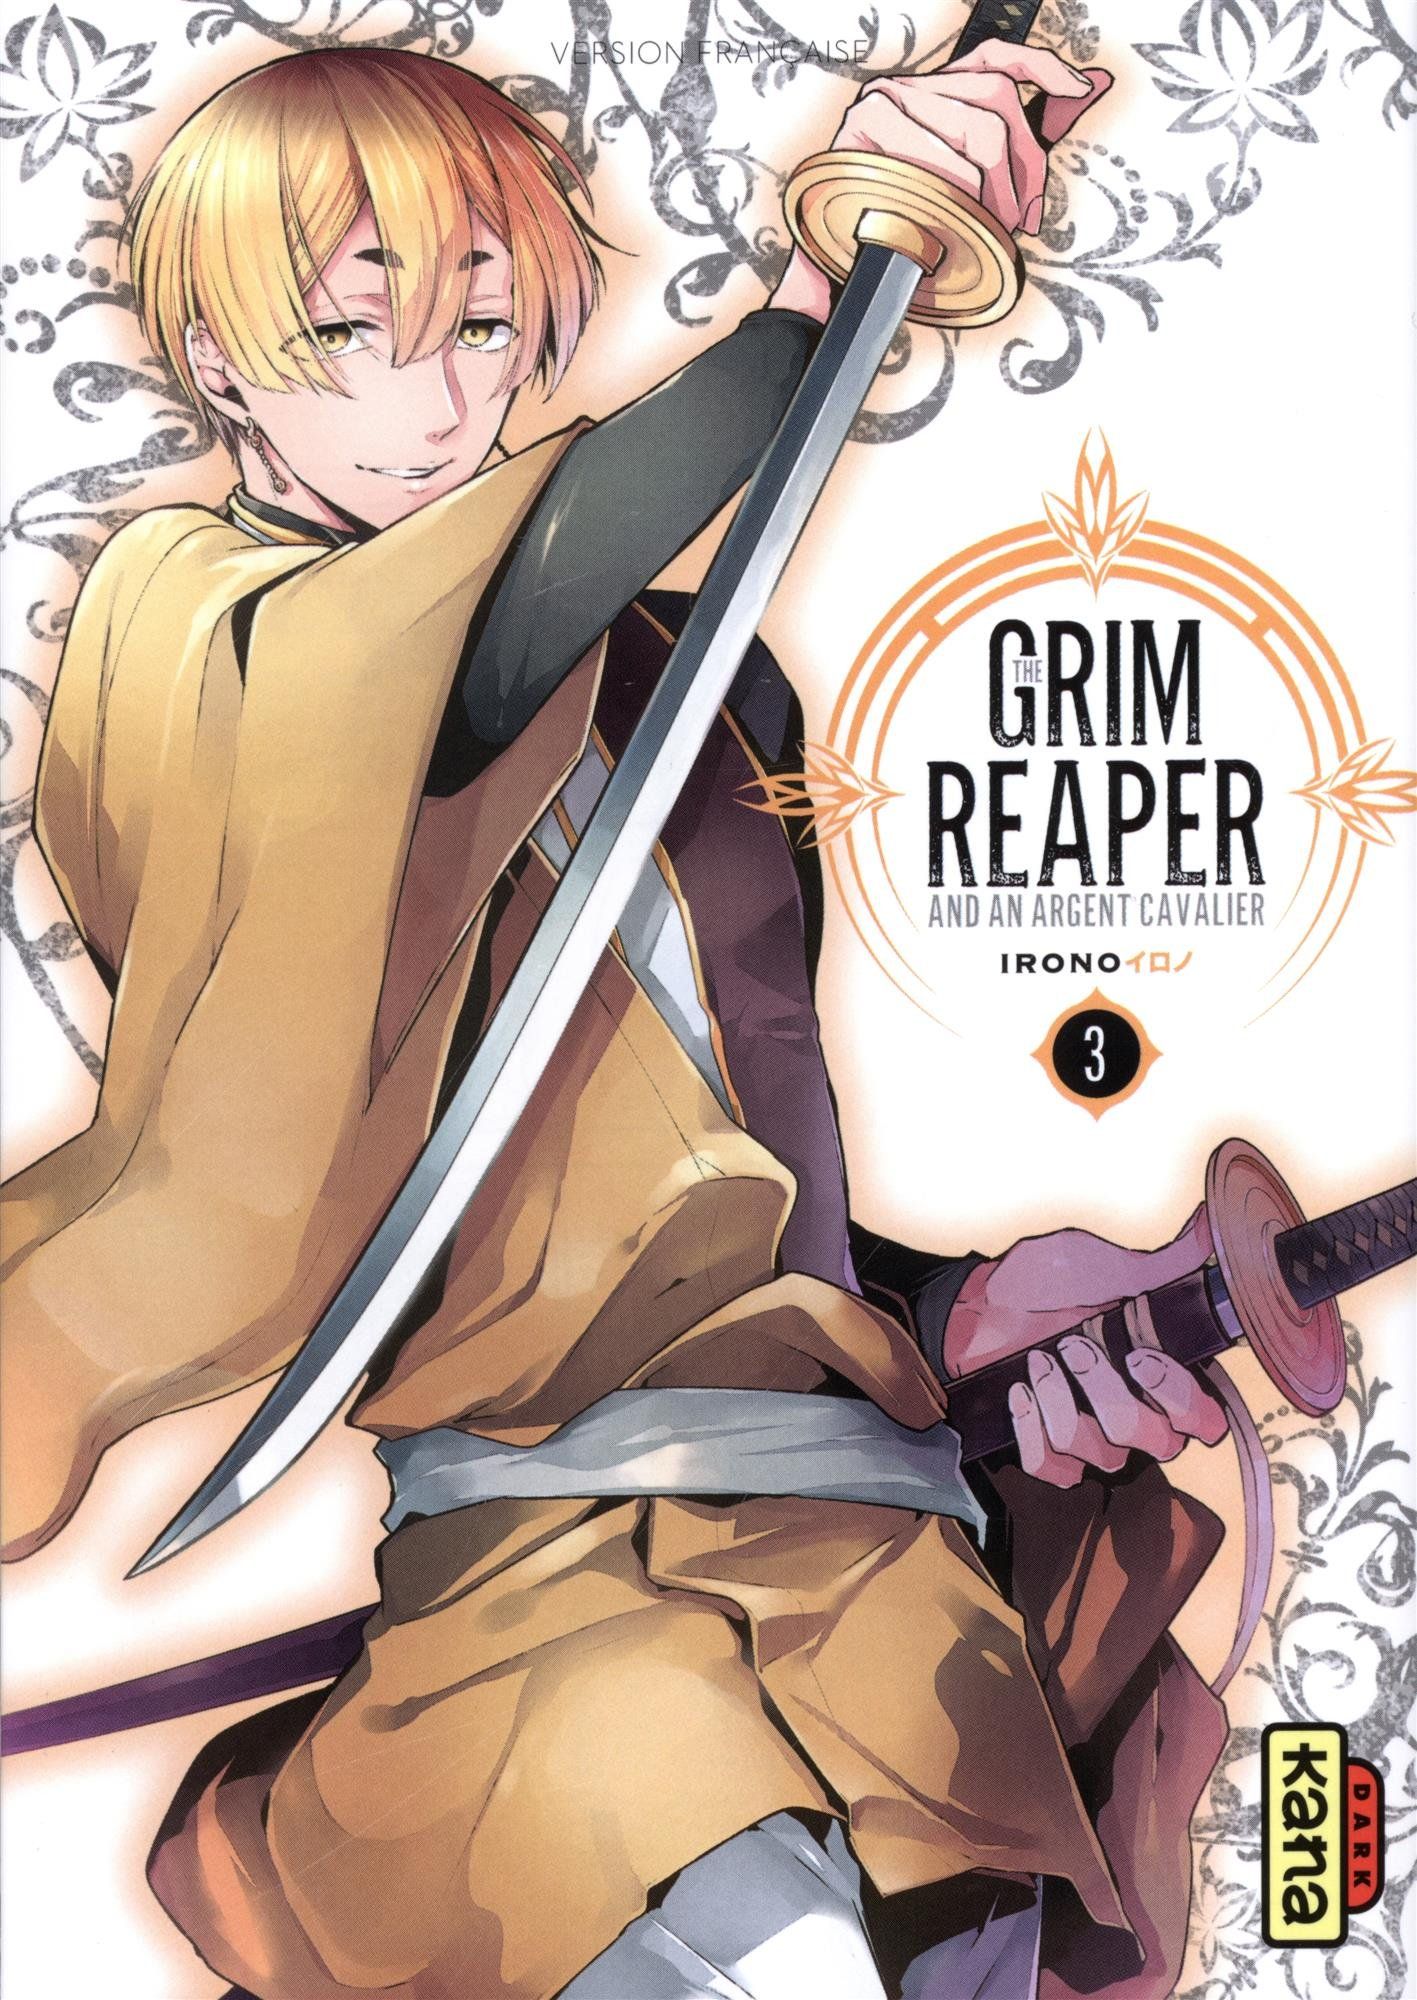 The Grim Reaper and an Argent Cavalier Vol.3